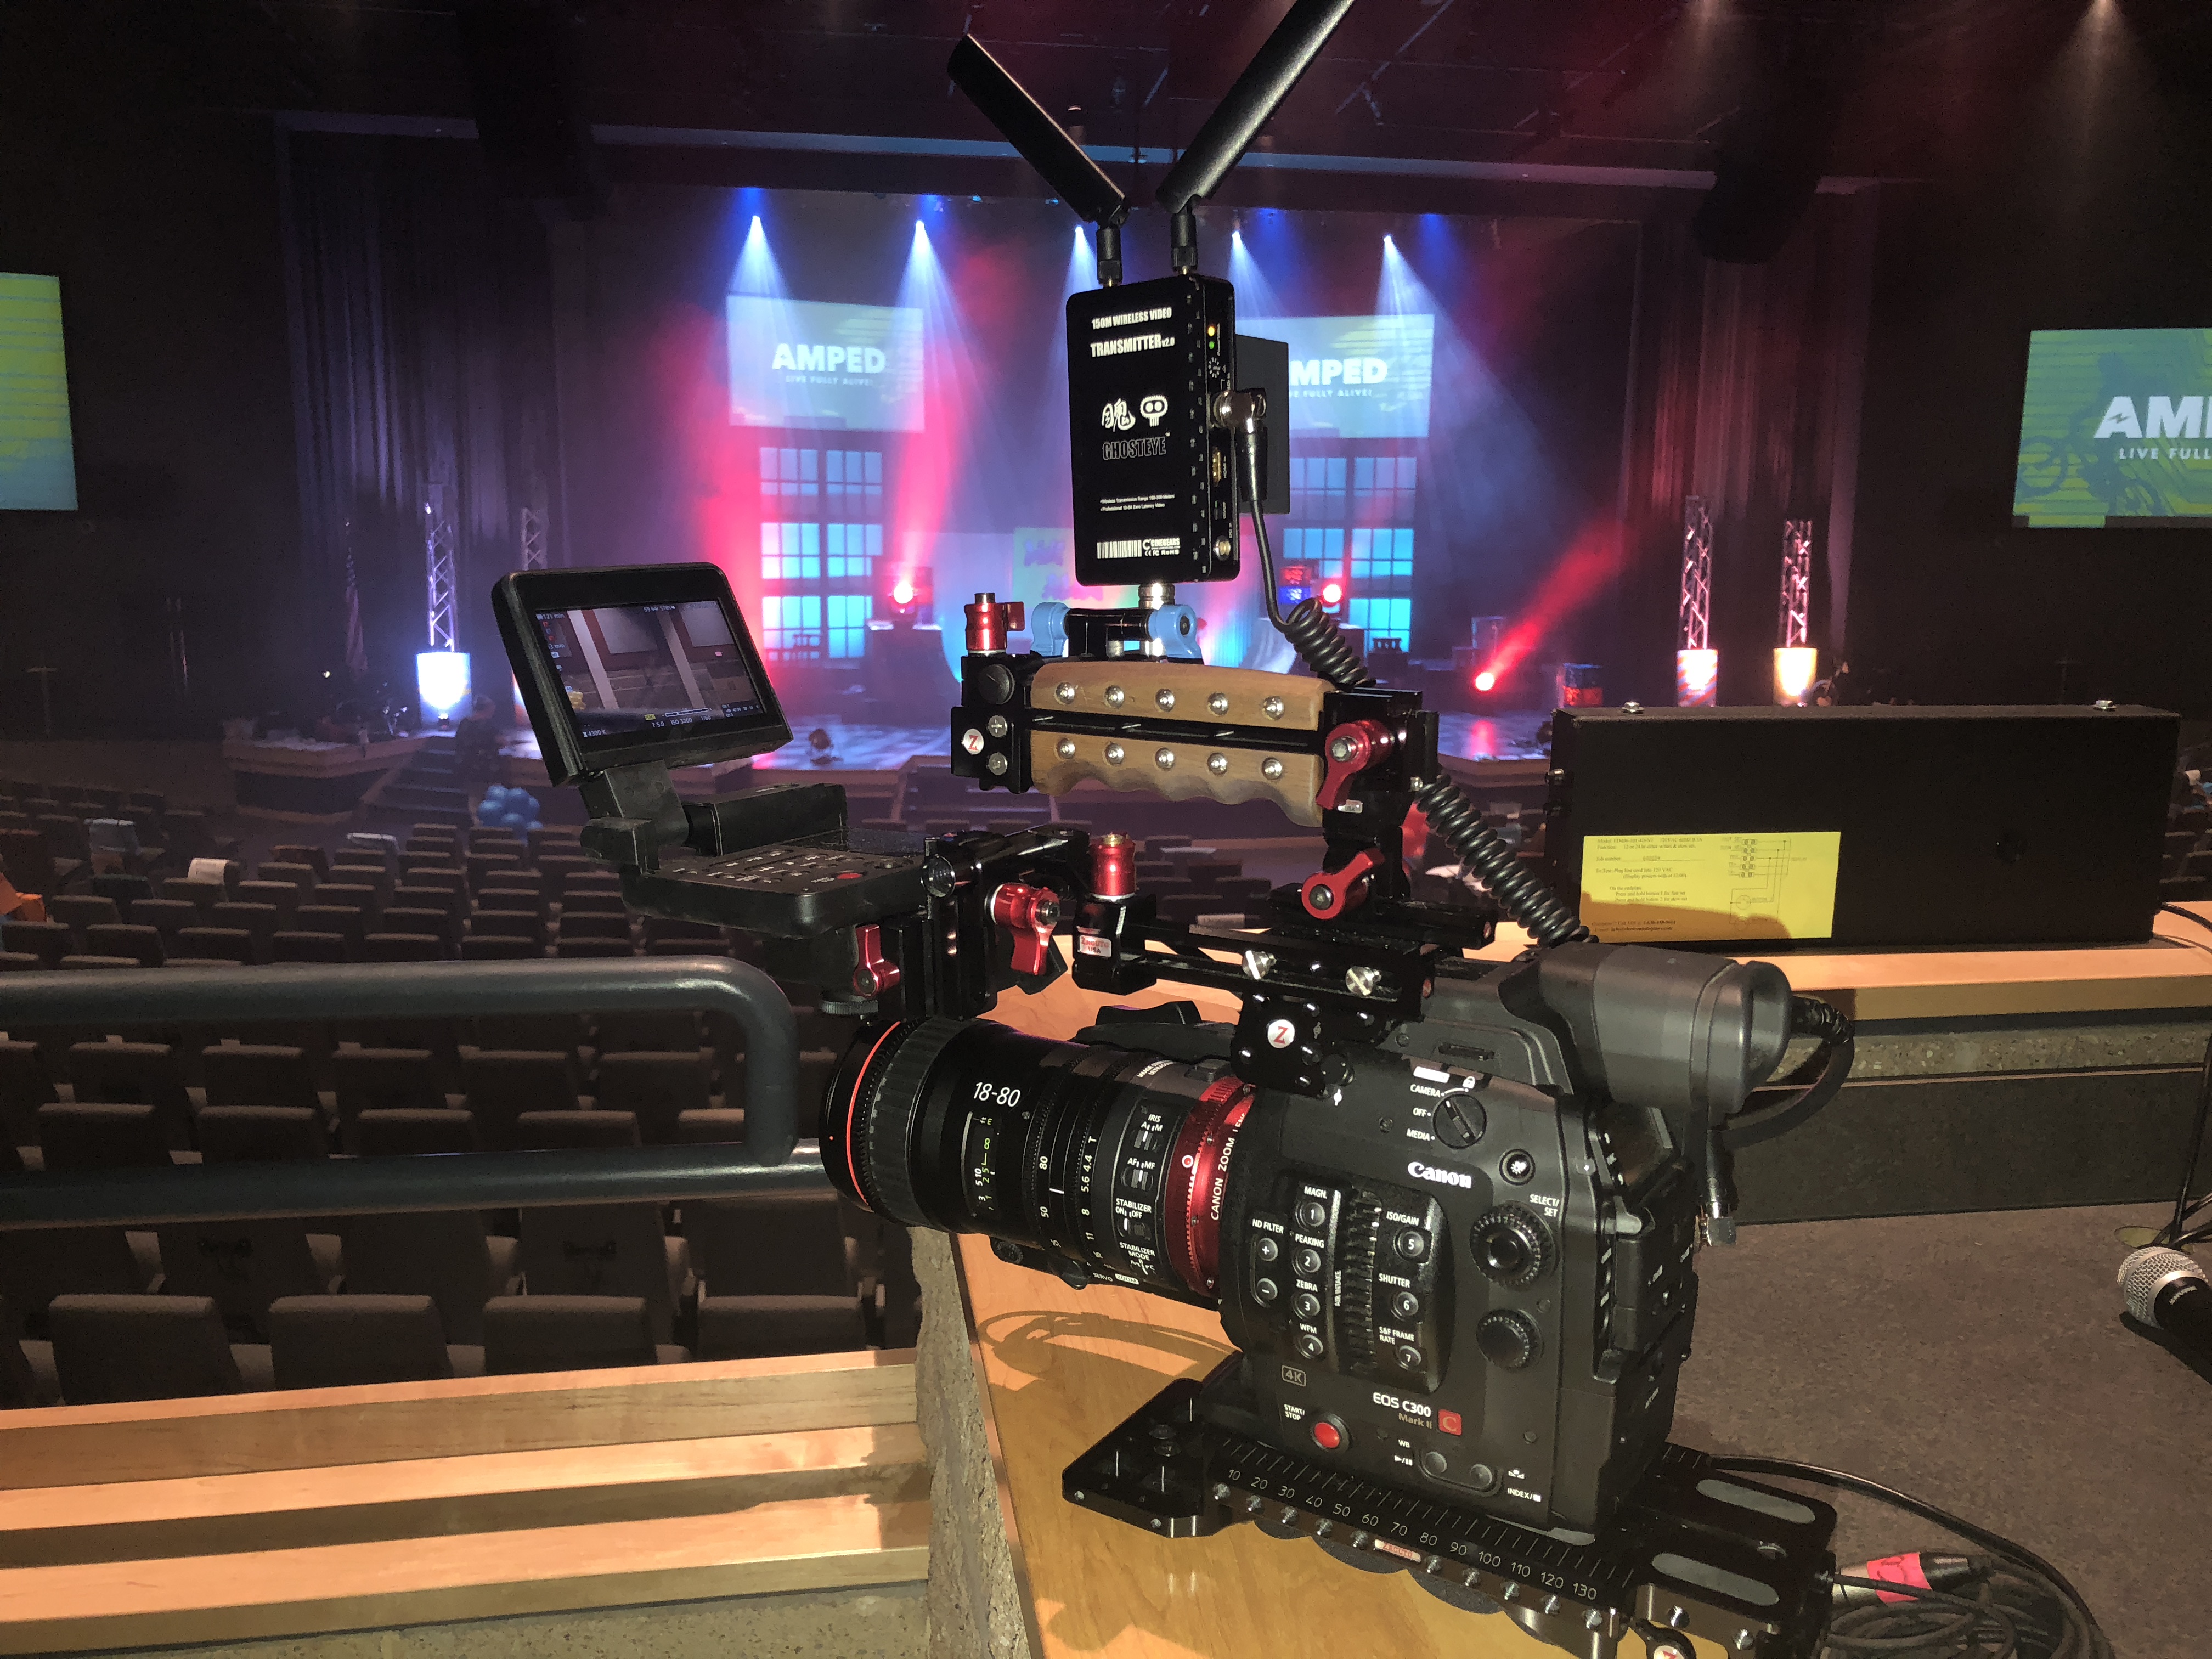 GT Church Upgrades Live Streaming Equipment and Processes with Adorama Business Solutions 